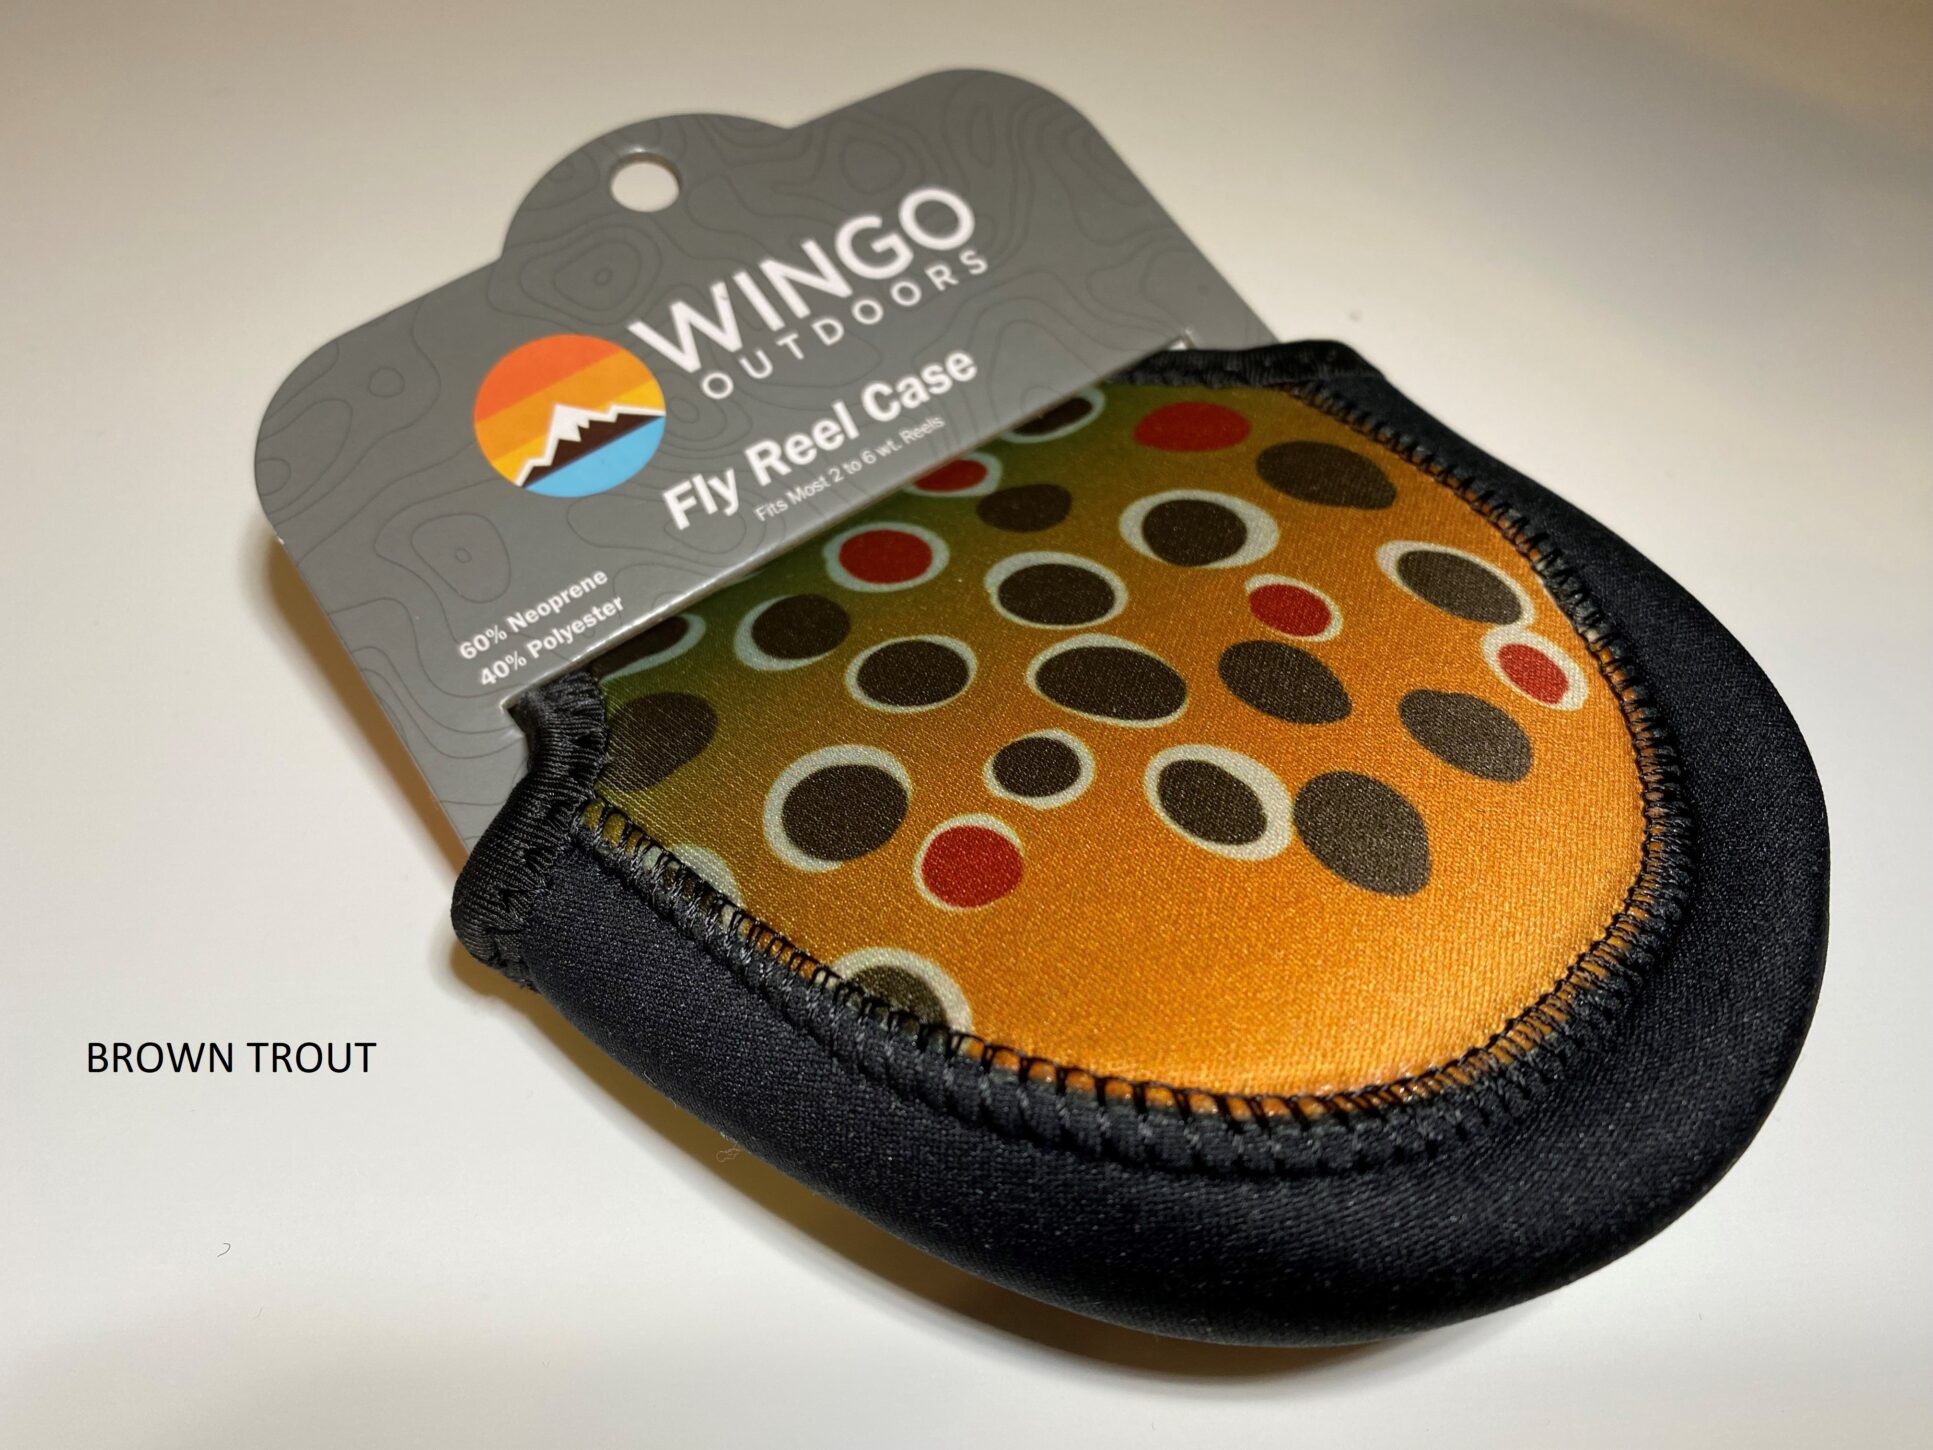 Wingo Outdoors Fly Reel Case in Small and Large  On The Fly Excursions - Fly  Fishing in North Georgia